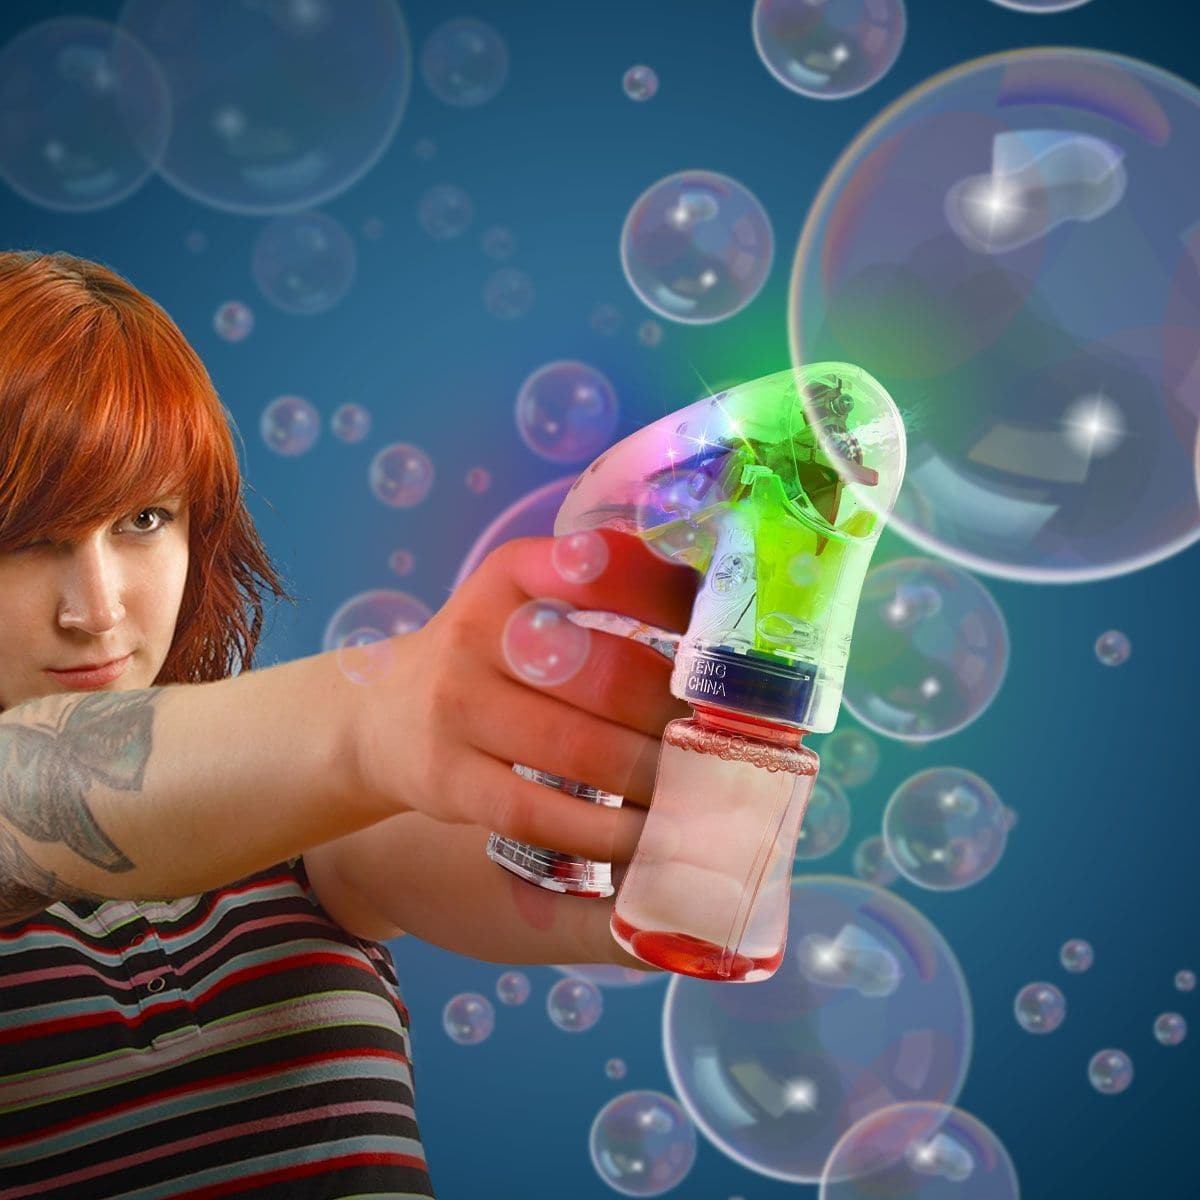 Bubble gun, Create beautiful barrages of bubbles with this fantastic light up bubble gun. Everyone will love to watch the bubbles and flashing lights whenever you pull the trigger on the Bubble gun. Use it in the dark for an enjoyable light show or in the light for simple bubble fun. A Bubble gun is a great toy for the home, classroom, or clinic that will keep kids entertained for hours! This bubble gun is a fantastic addition to your sensory collection. The Bubble Gun is great as a reinforcer for your ABA 